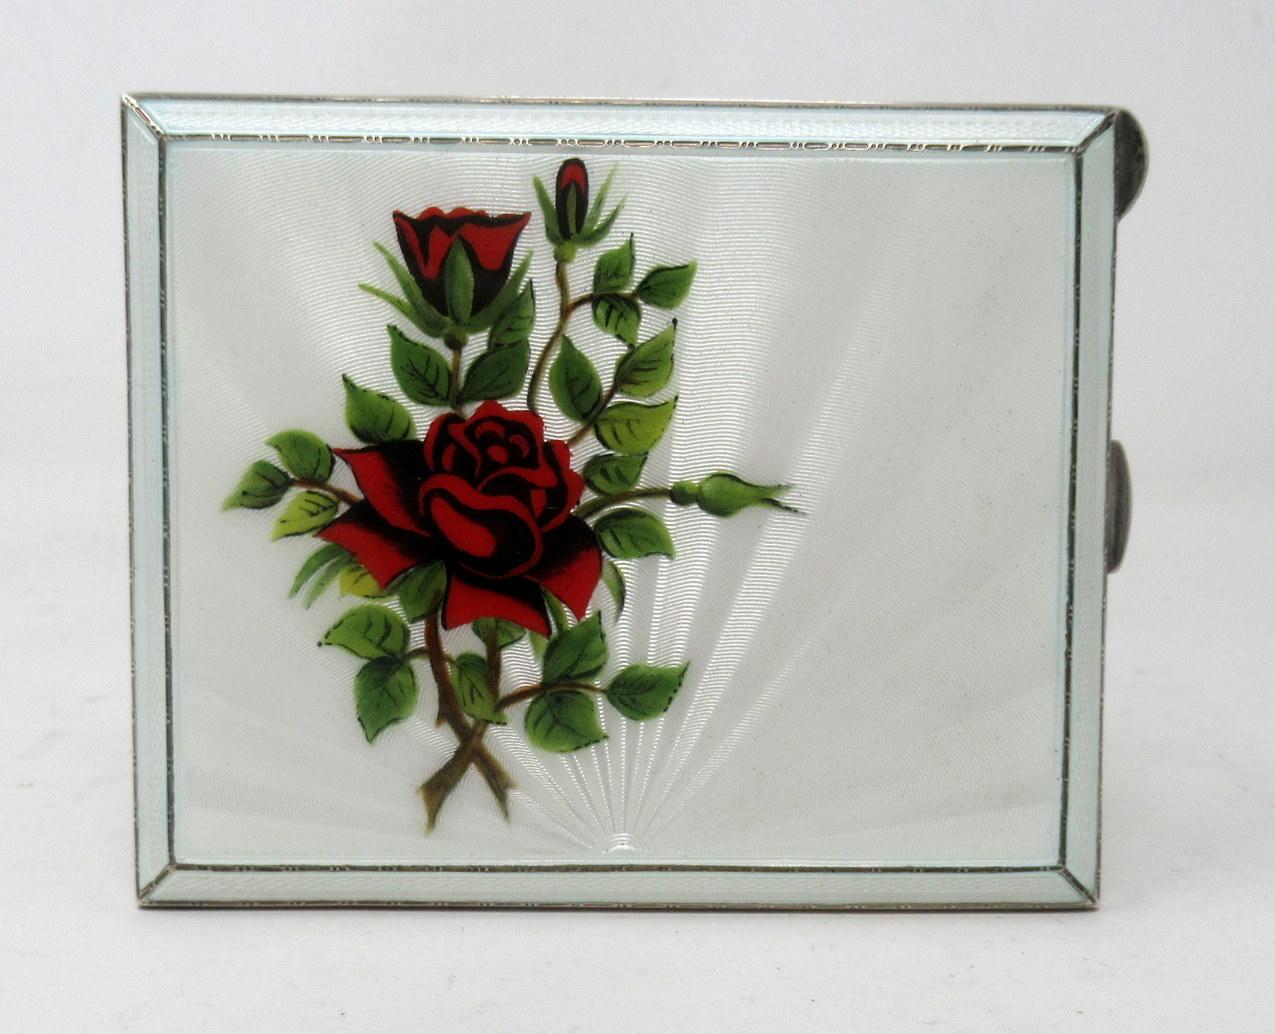 A superb example of a mid century heavy gauge Guilloche and enameled Sterling Silver Gilt hinged lidded Card Case of outstanding quality and condition for such an early silver item. 

The rectangular cover enameled in colours of red and greens